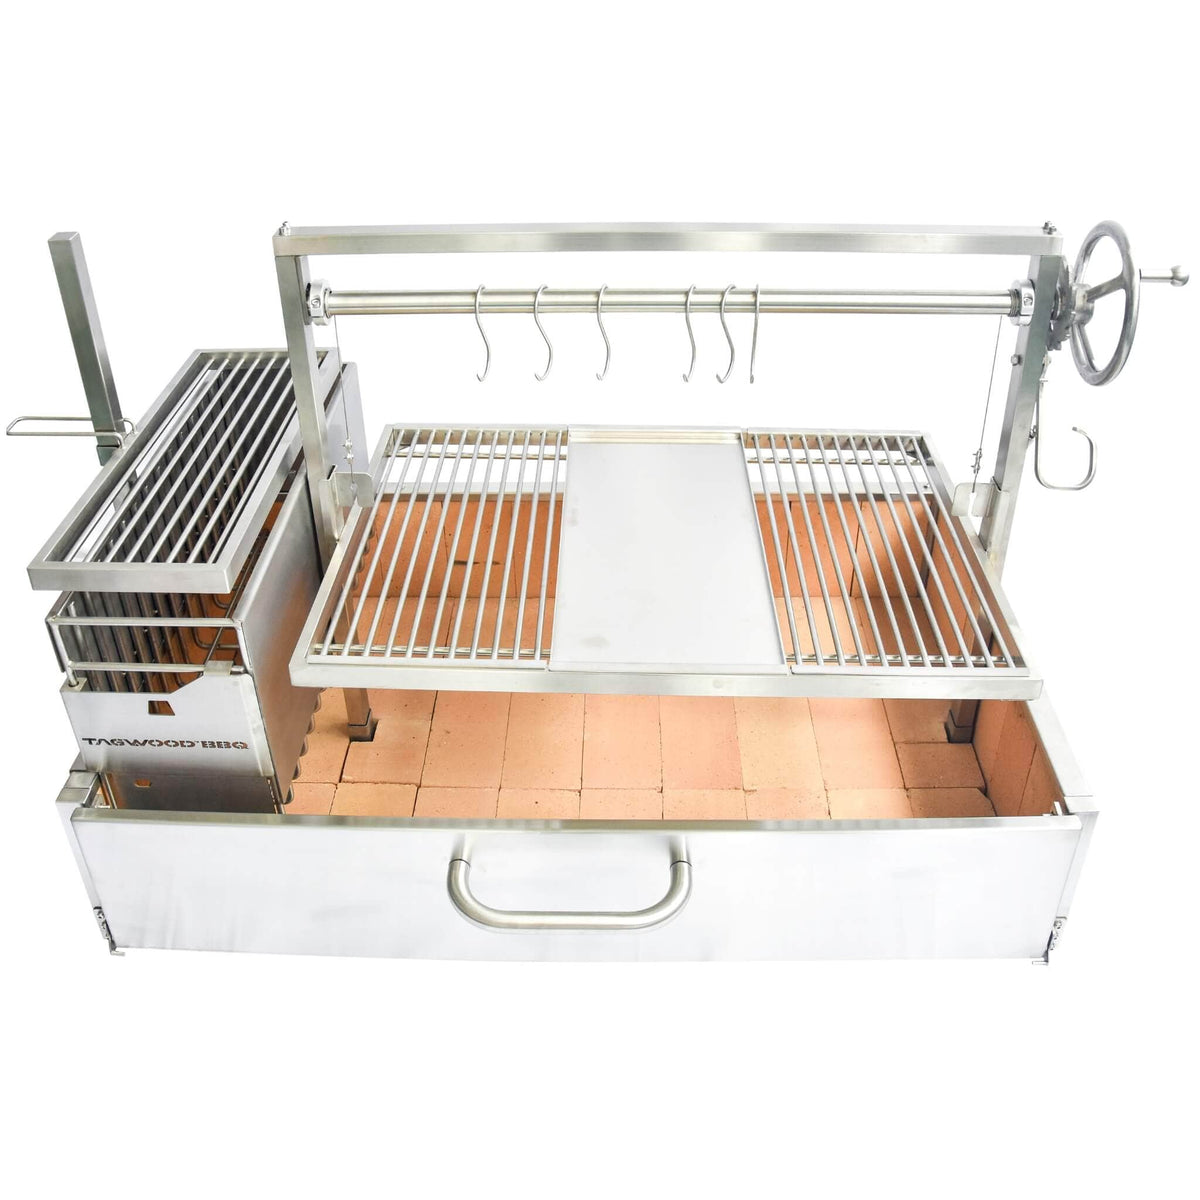 Tagwood BBQ XL Built-In Santa Maria Argentine Wood Fire &amp; Charcoal Gaucho Grill OPEN FIRE COOKING